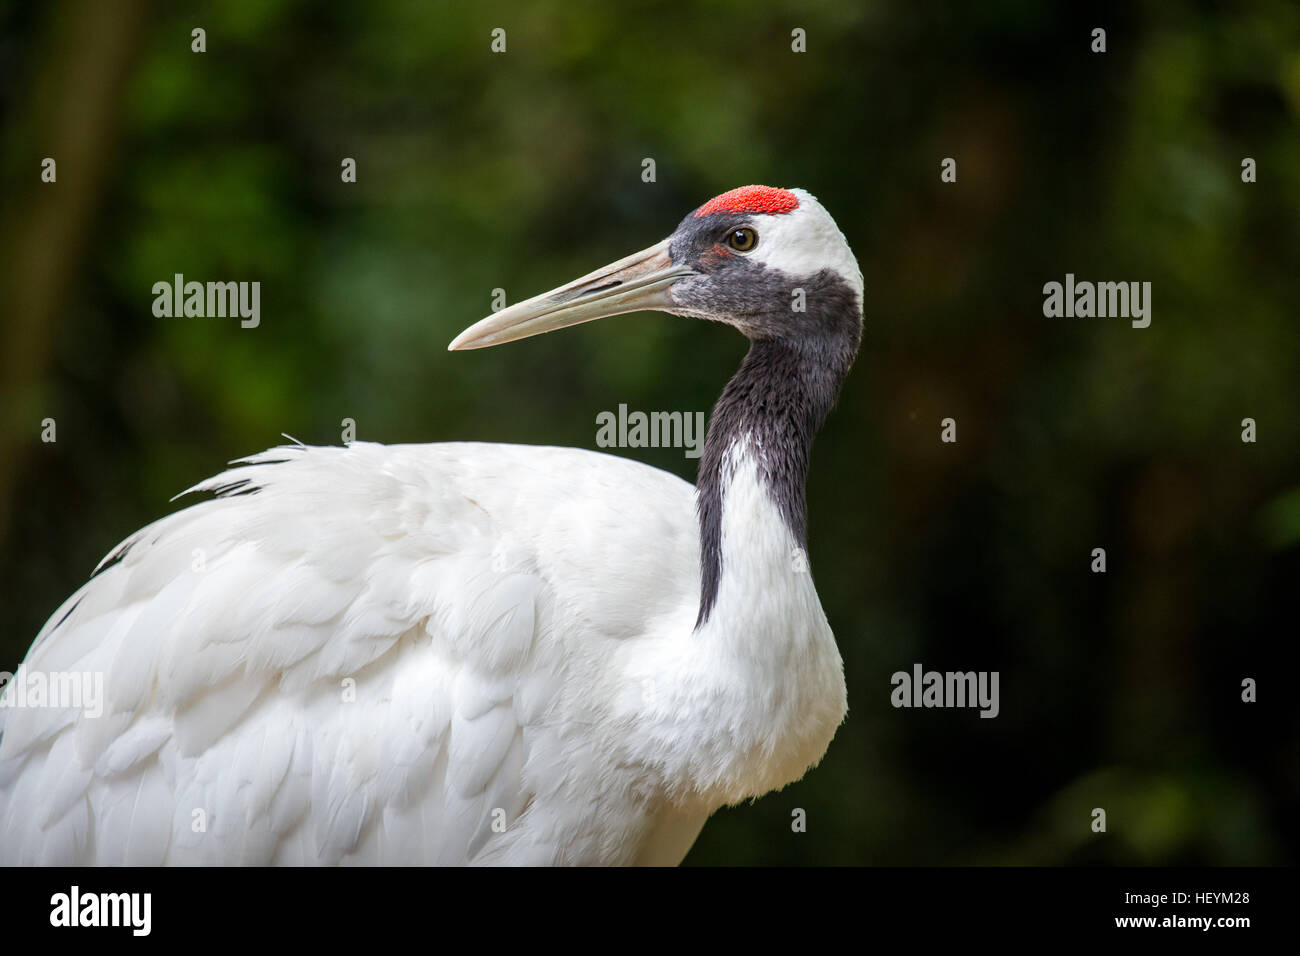 Portrait of a red-crowned crane, Grus japonensis, or Japanese crane. In East Asia it is known as a symbol of luck, longevity and fidelity. Stock Photo